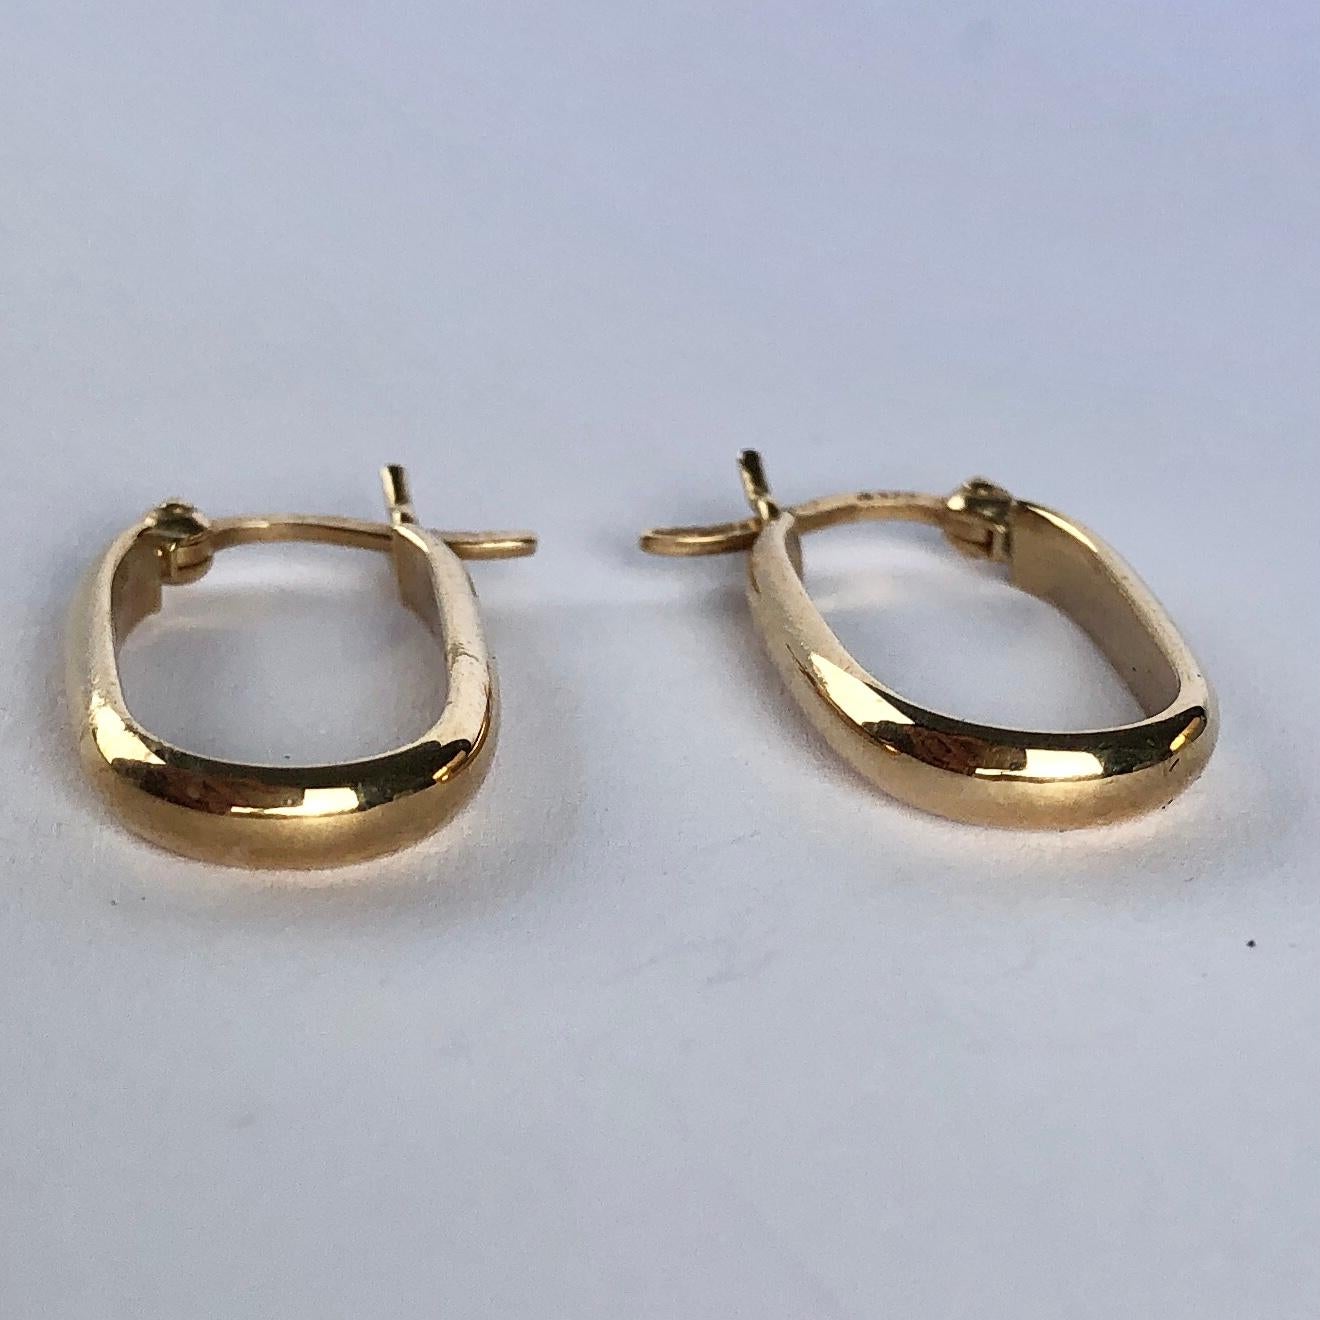 The earrings are modelled out of 9ct yellow gold and are a slim oval shape. They fasten with an easy push clip. 

Hoop Dimensions: 11x20mm 

Weight: 1.1g 